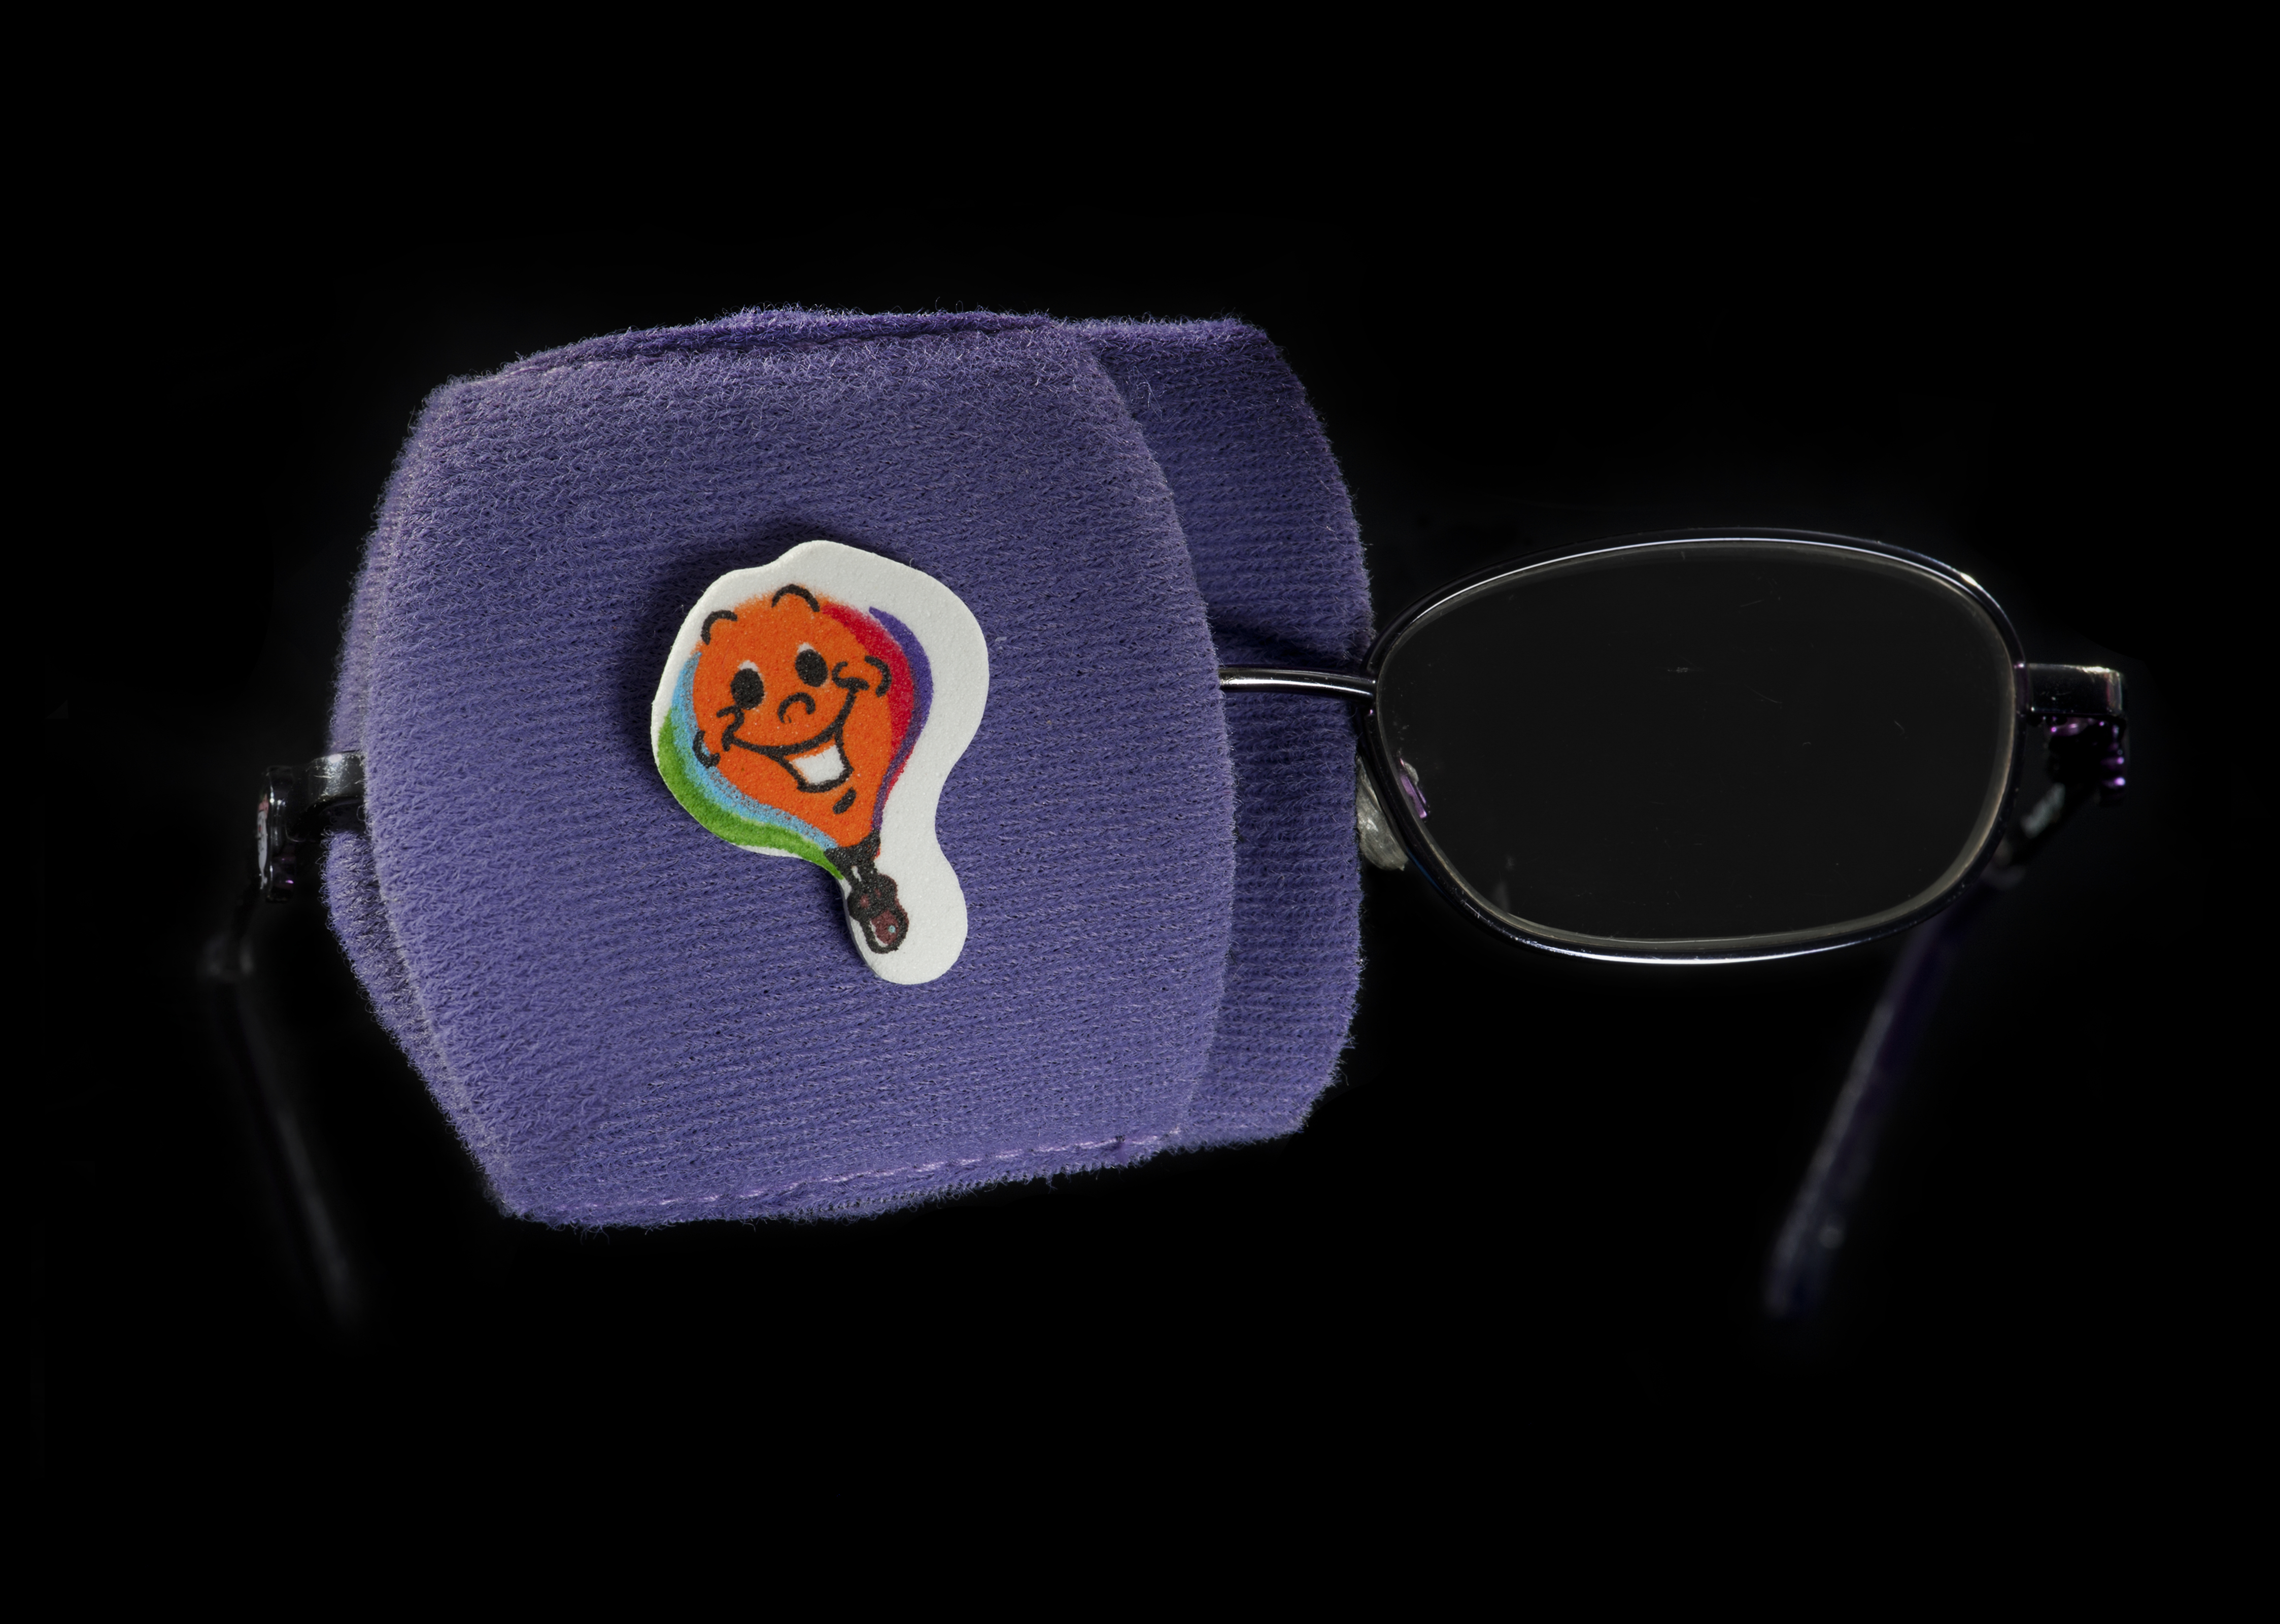 A colourful fabric patch attached to one lens of a pair of glasses